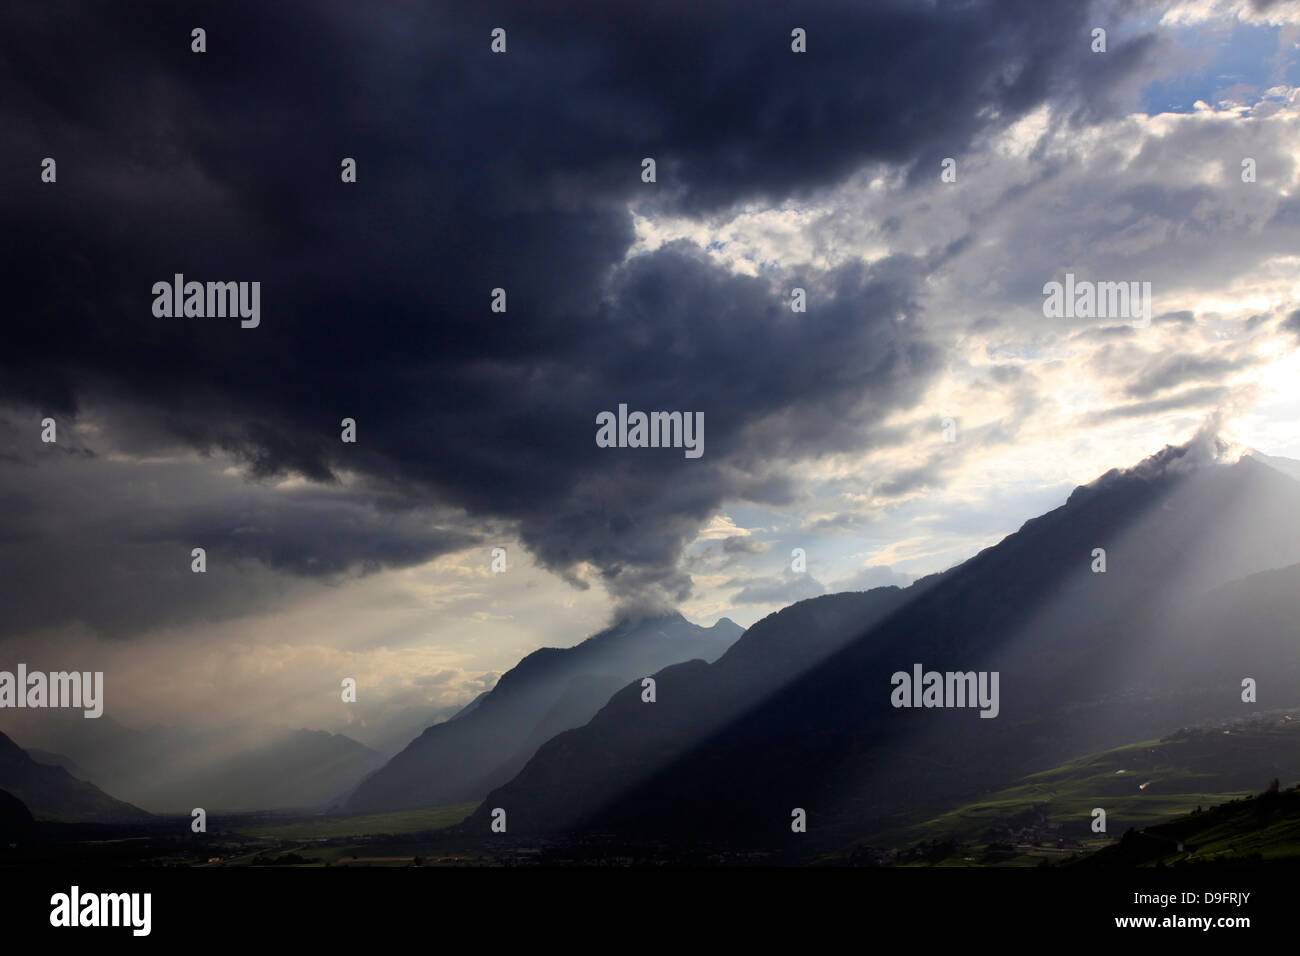 Summer storm clearing over the mountains of the Valais region, Swiss Alps, Switzerland Stock Photo